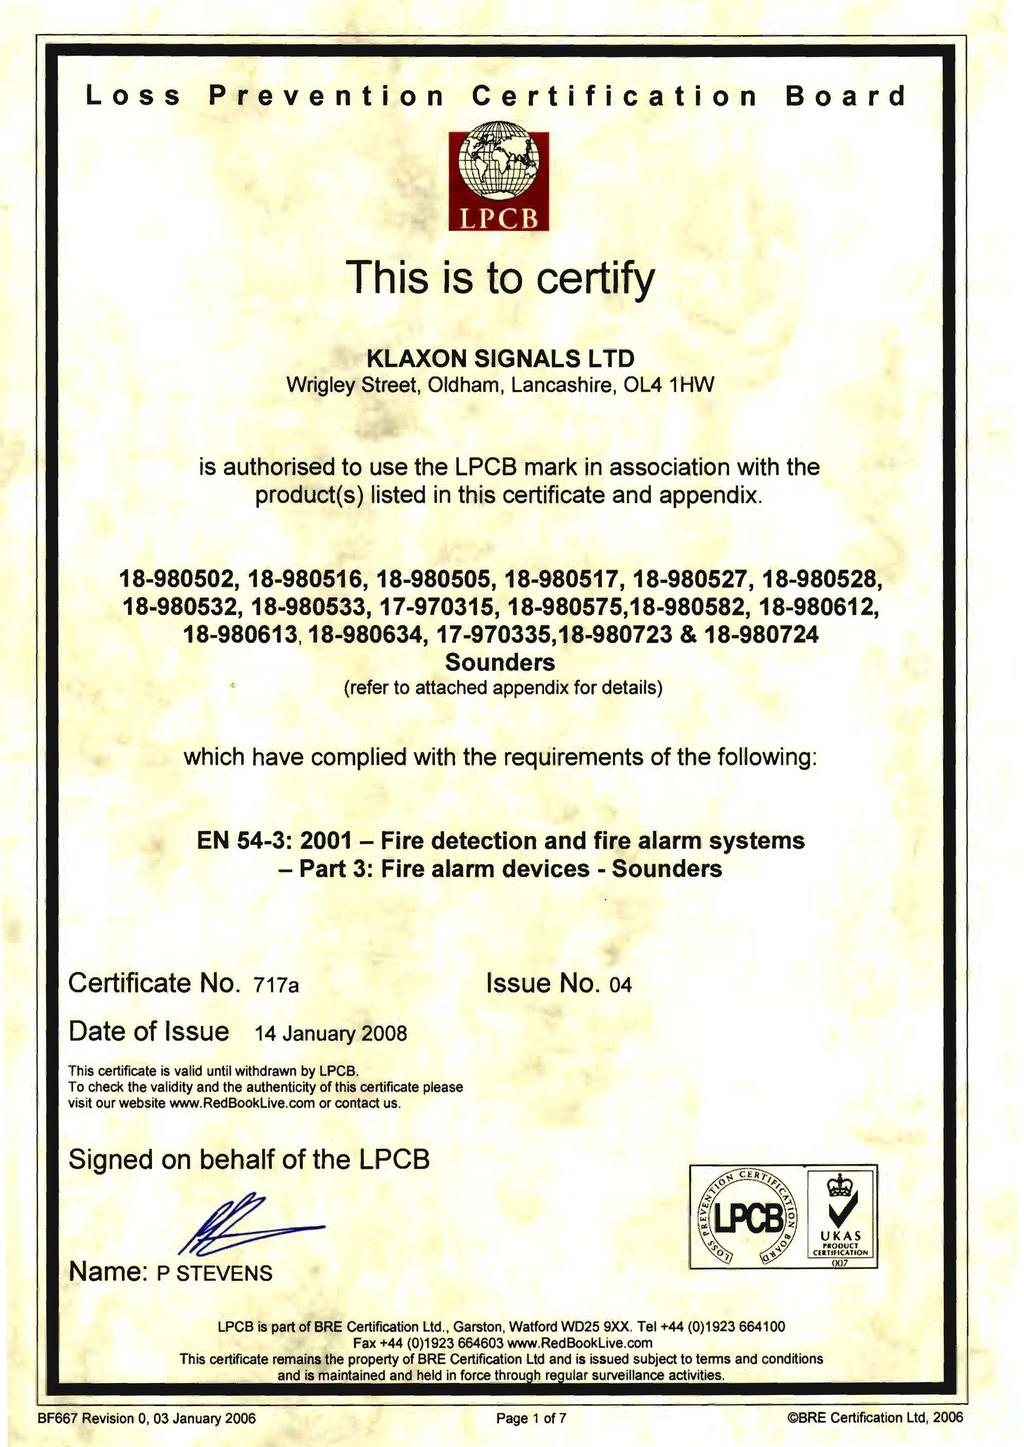 This is to certify Wrigley Street, Oldham, Lancashire, OL4 1HW is authorised to use the LPCB mark in association with the product(s) listed in thi's certificate and appendix.